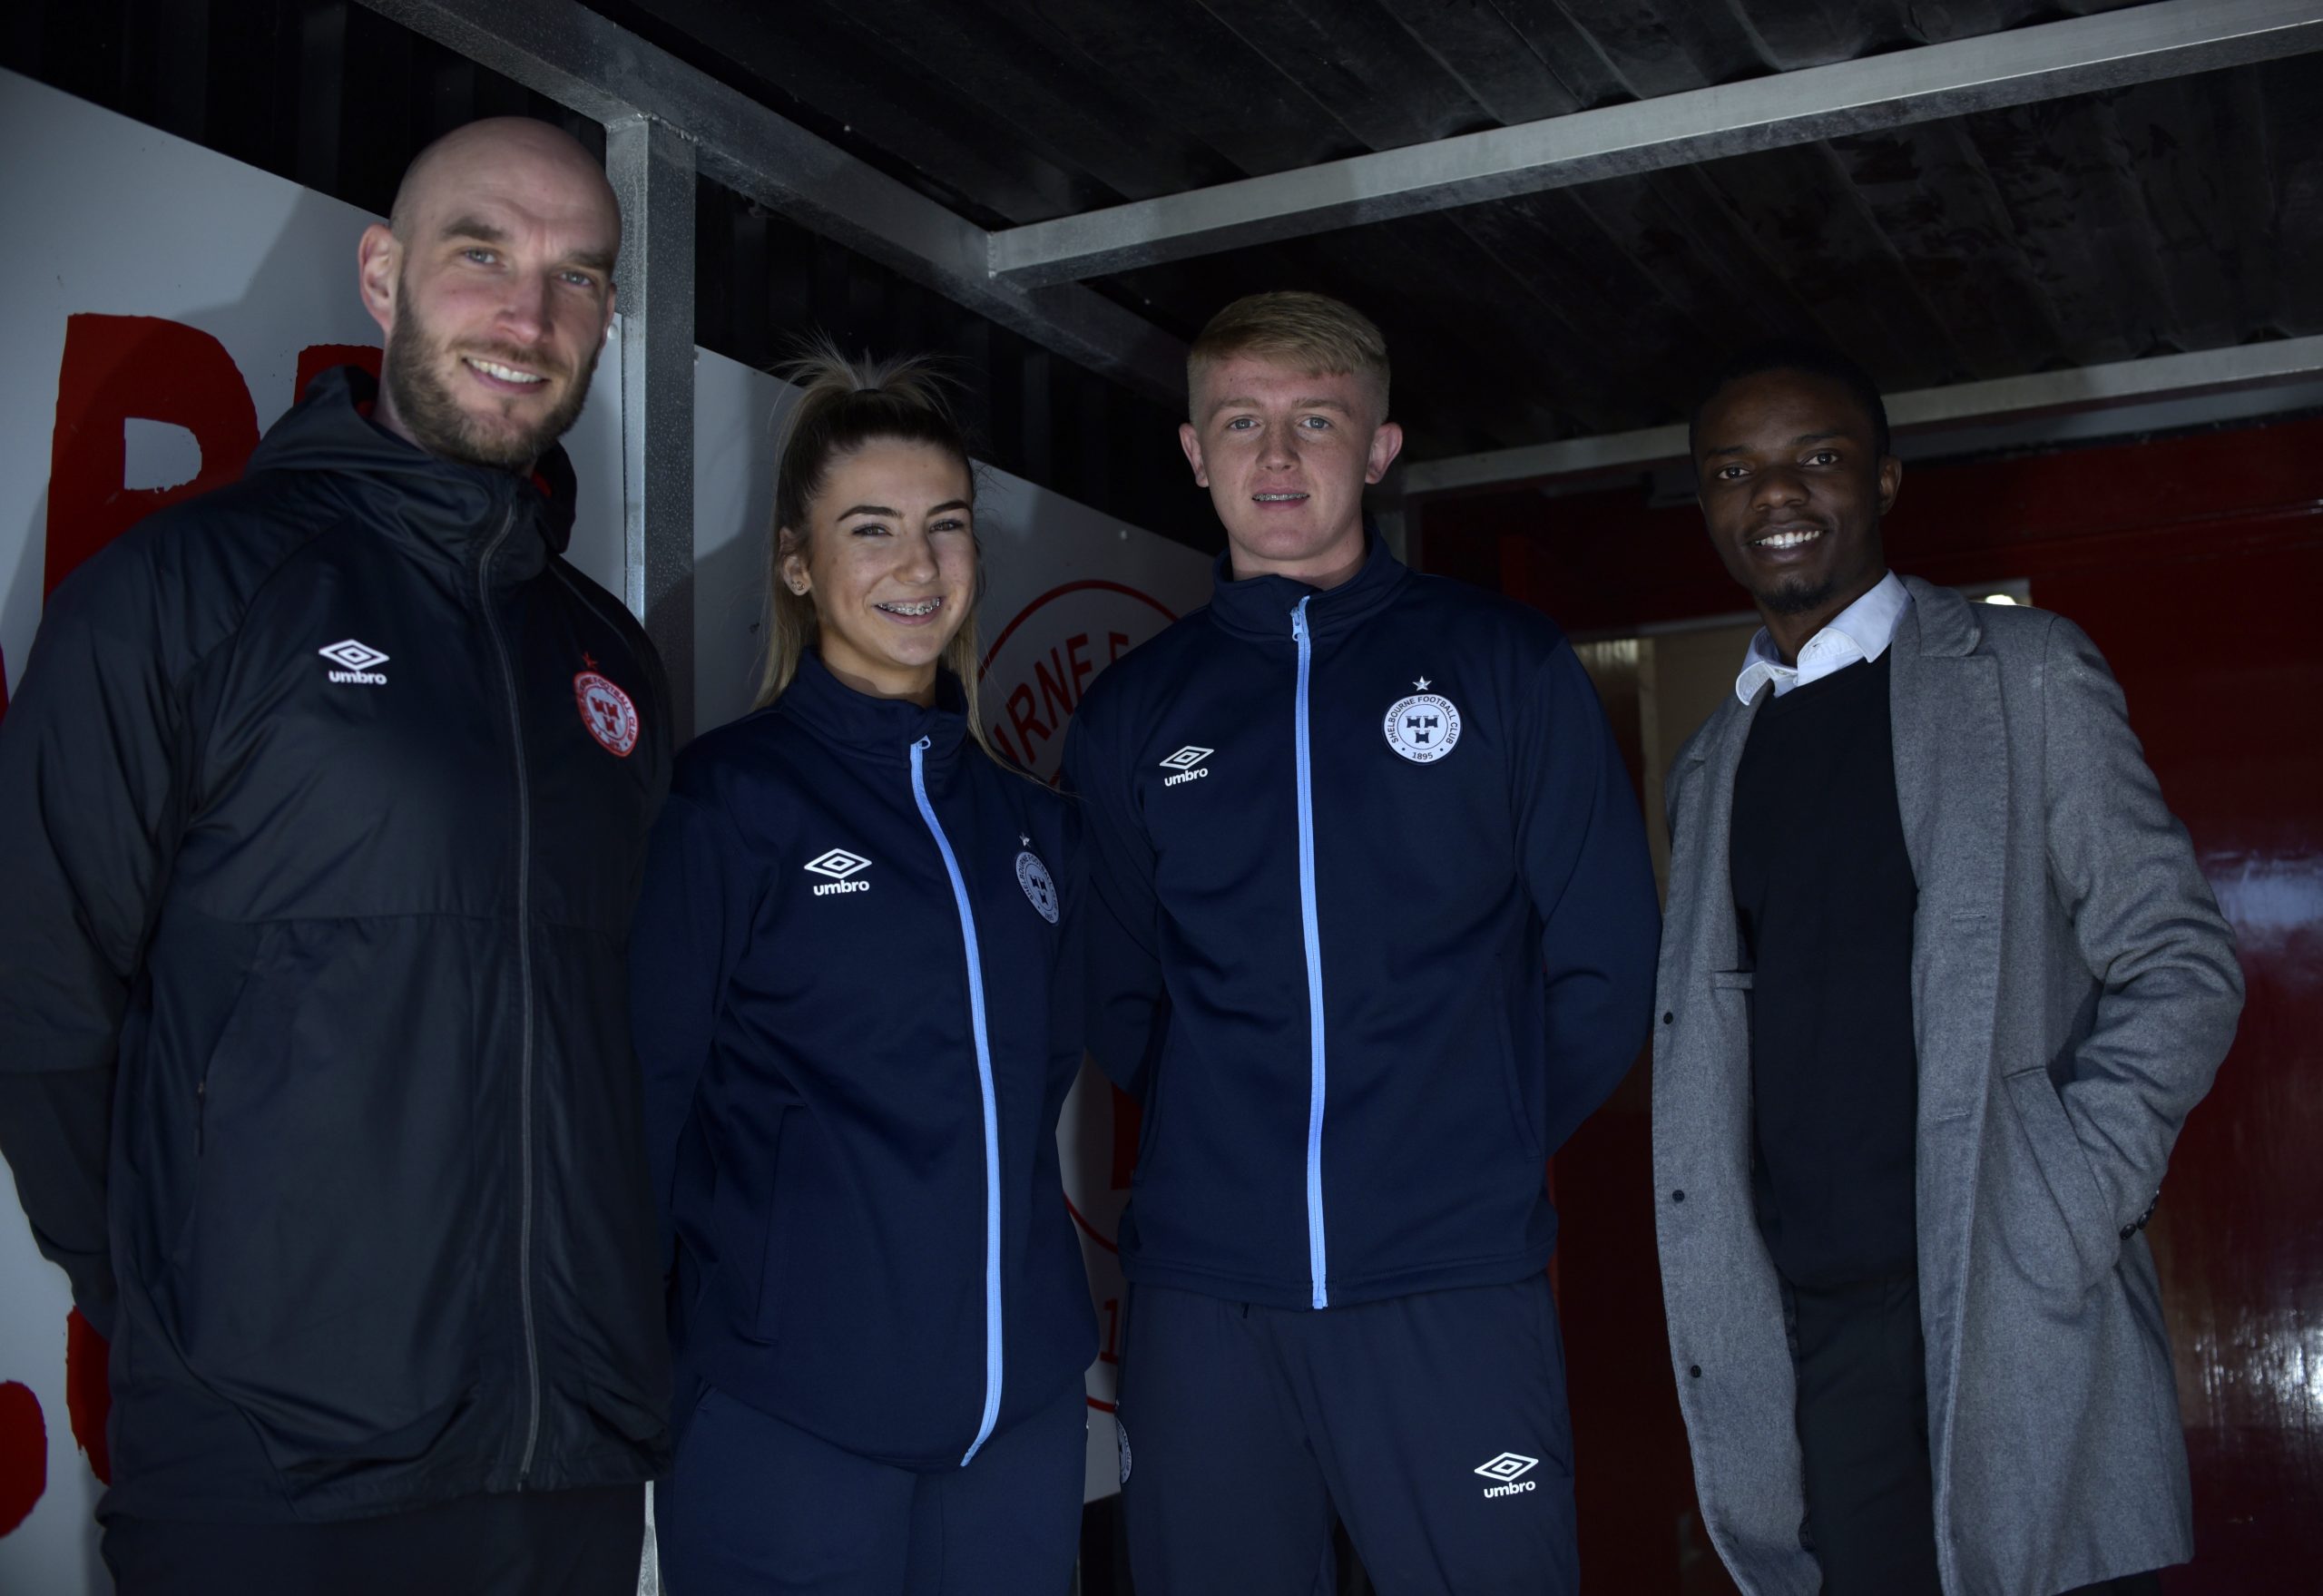 Shels and Innumeris Education partner up to provide academic support for Academy players